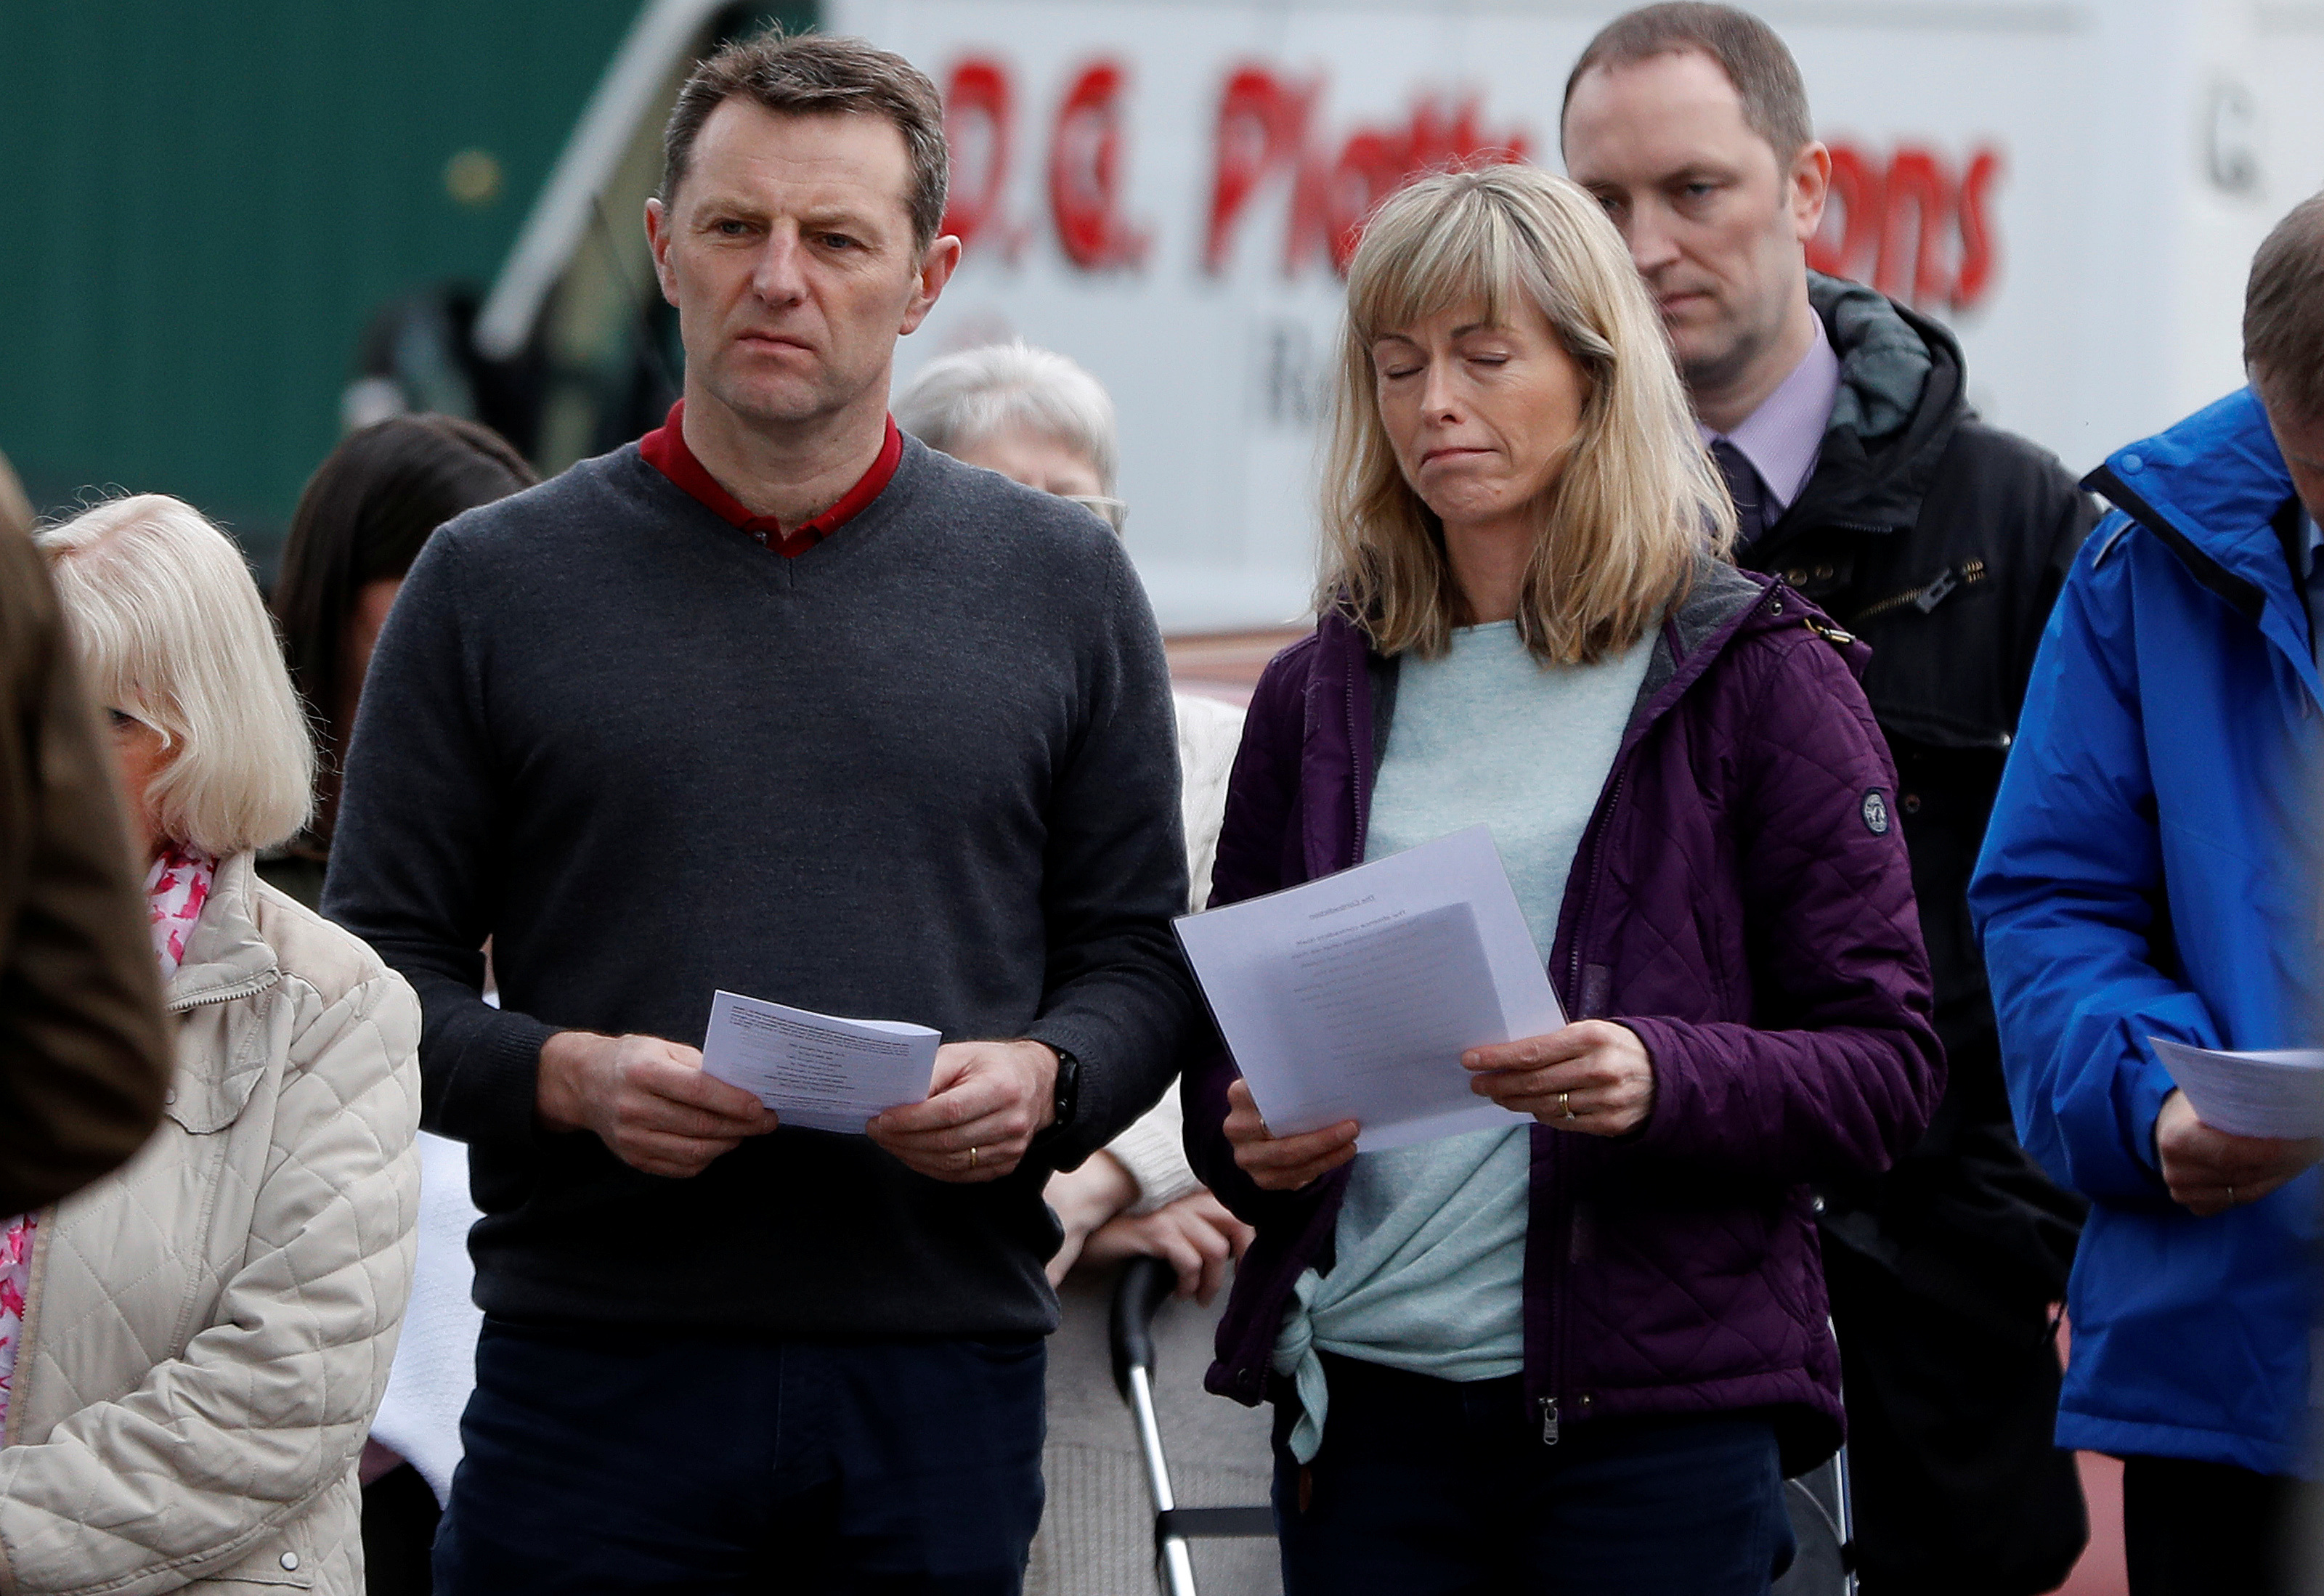 Kate and Gerry McCann attend a service to mark the 11th anniversary of the disappearance of their daughter Madeleine from a holiday flat in Portugal, near her home in Rothley